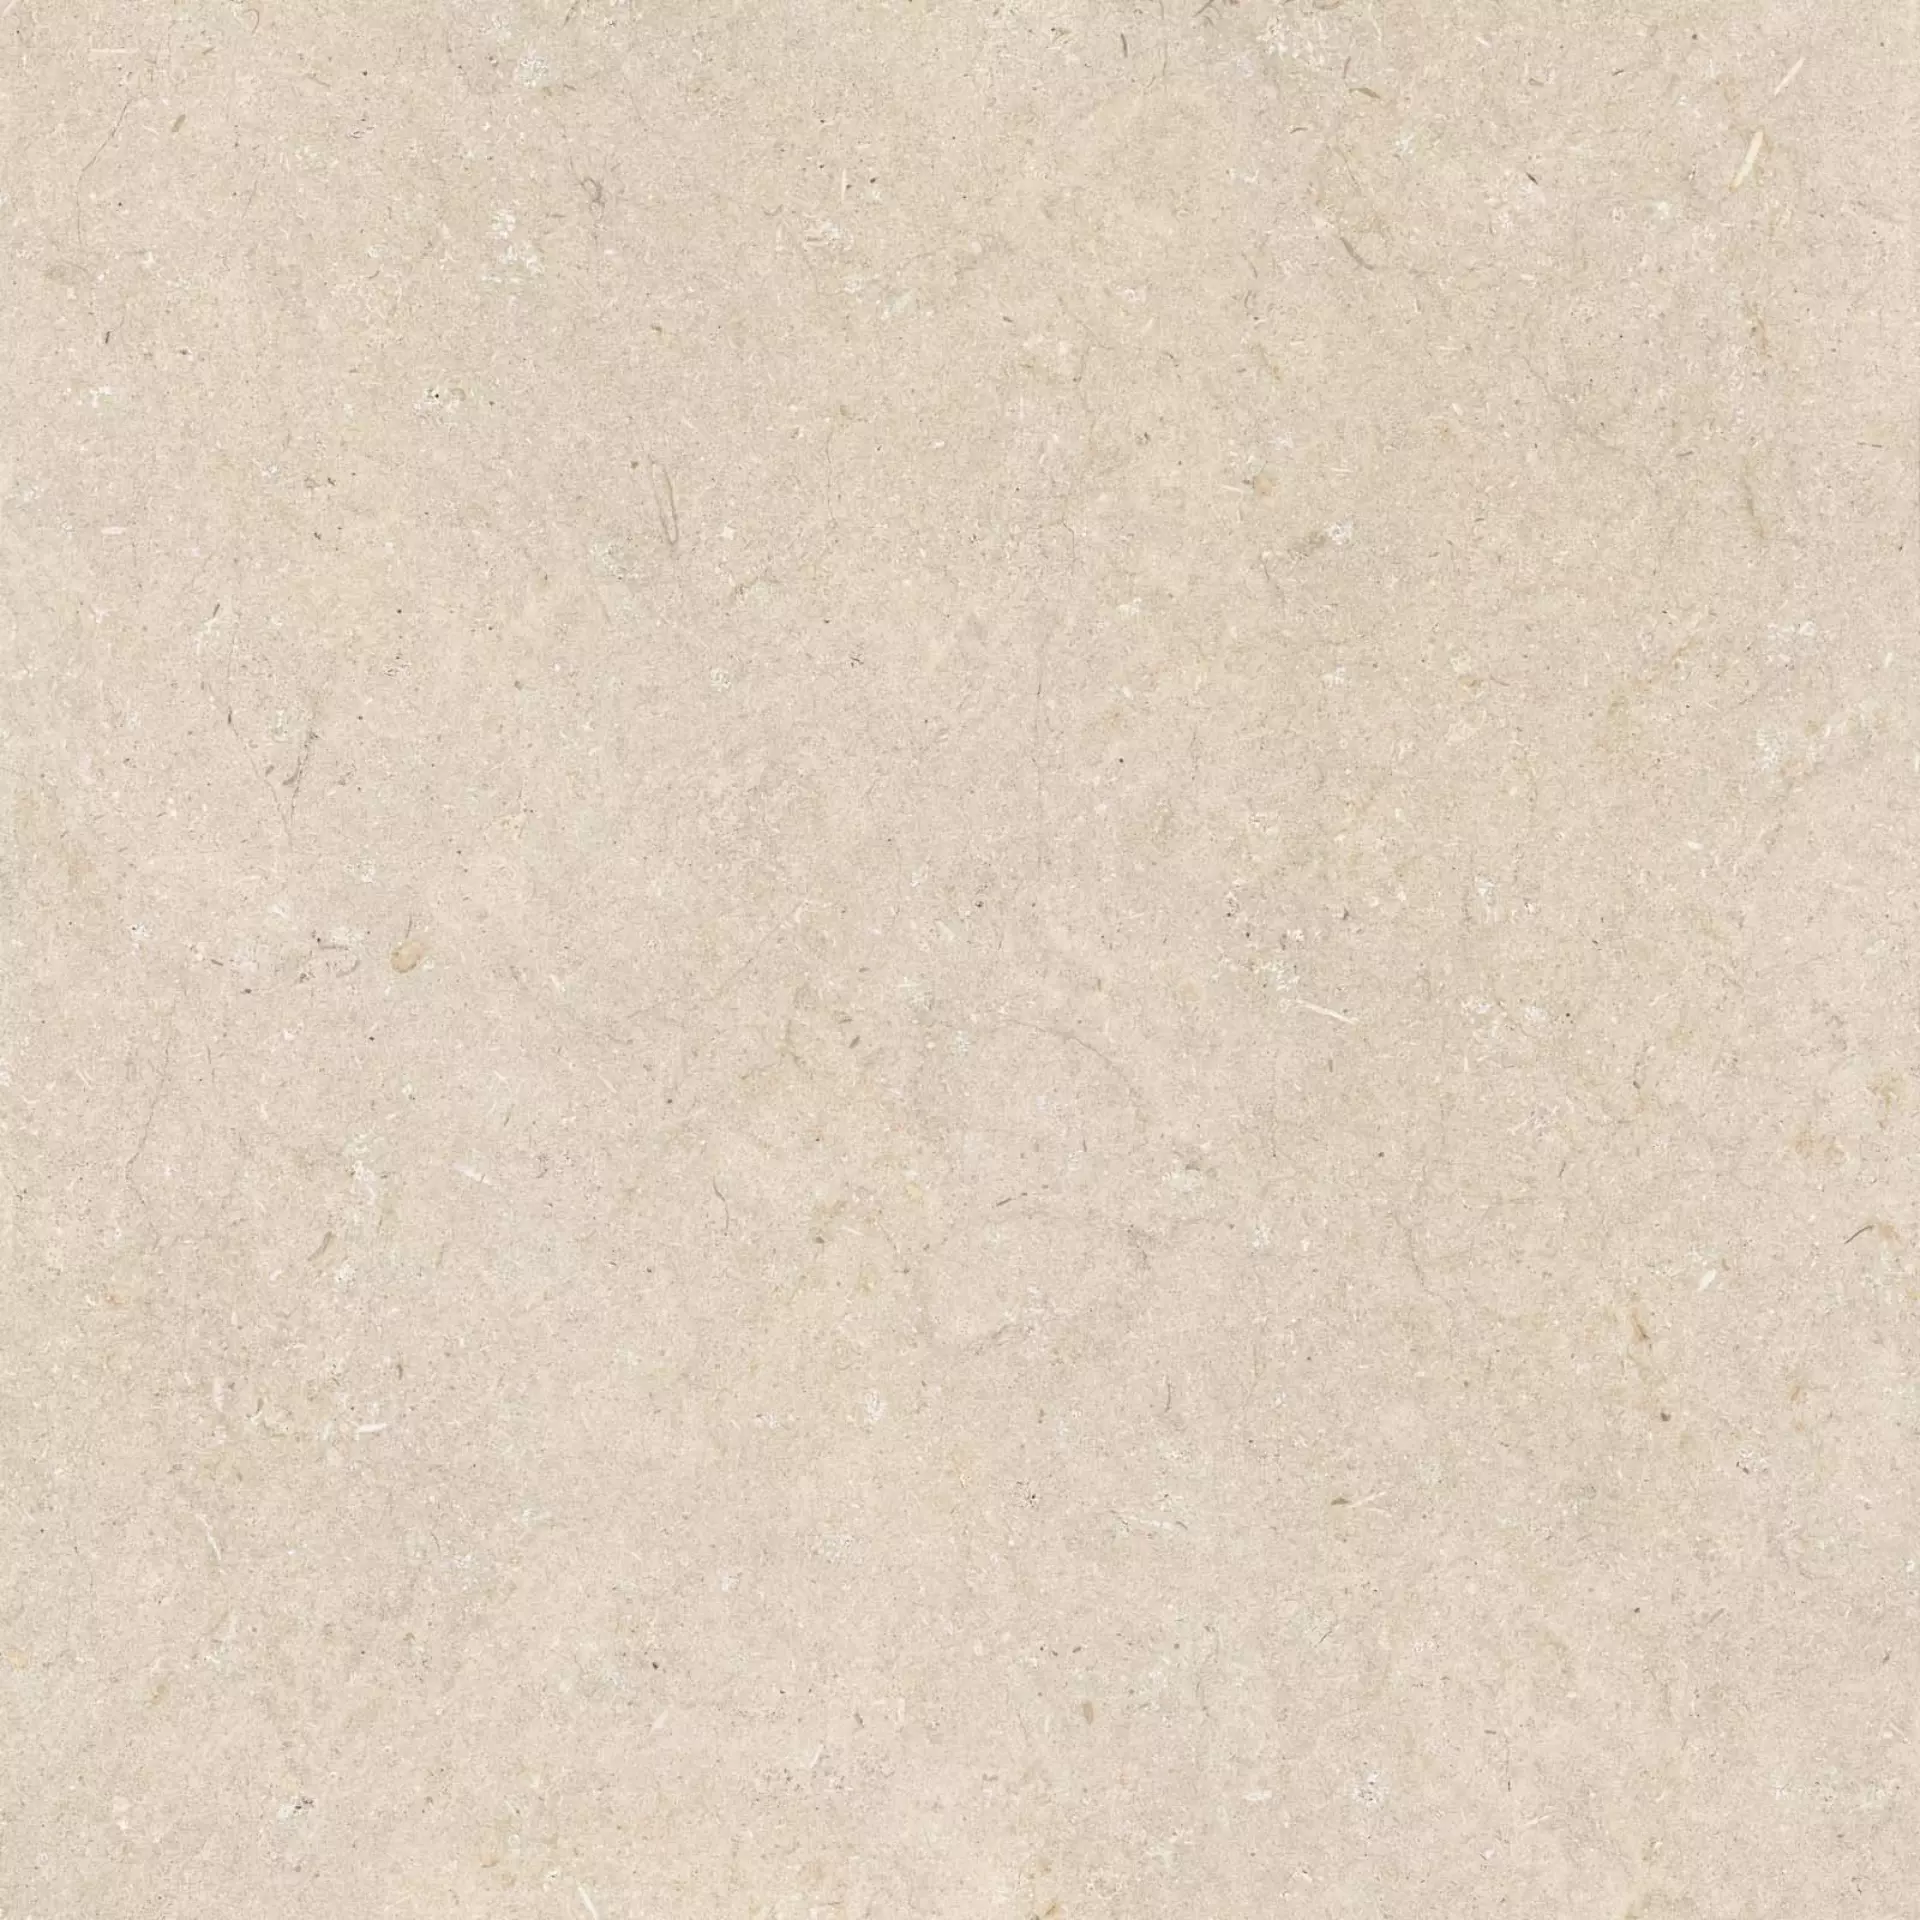 ABK Poetry Stone Trani Beige Naturale PF60010536 120x120cm rectified 8,5mm